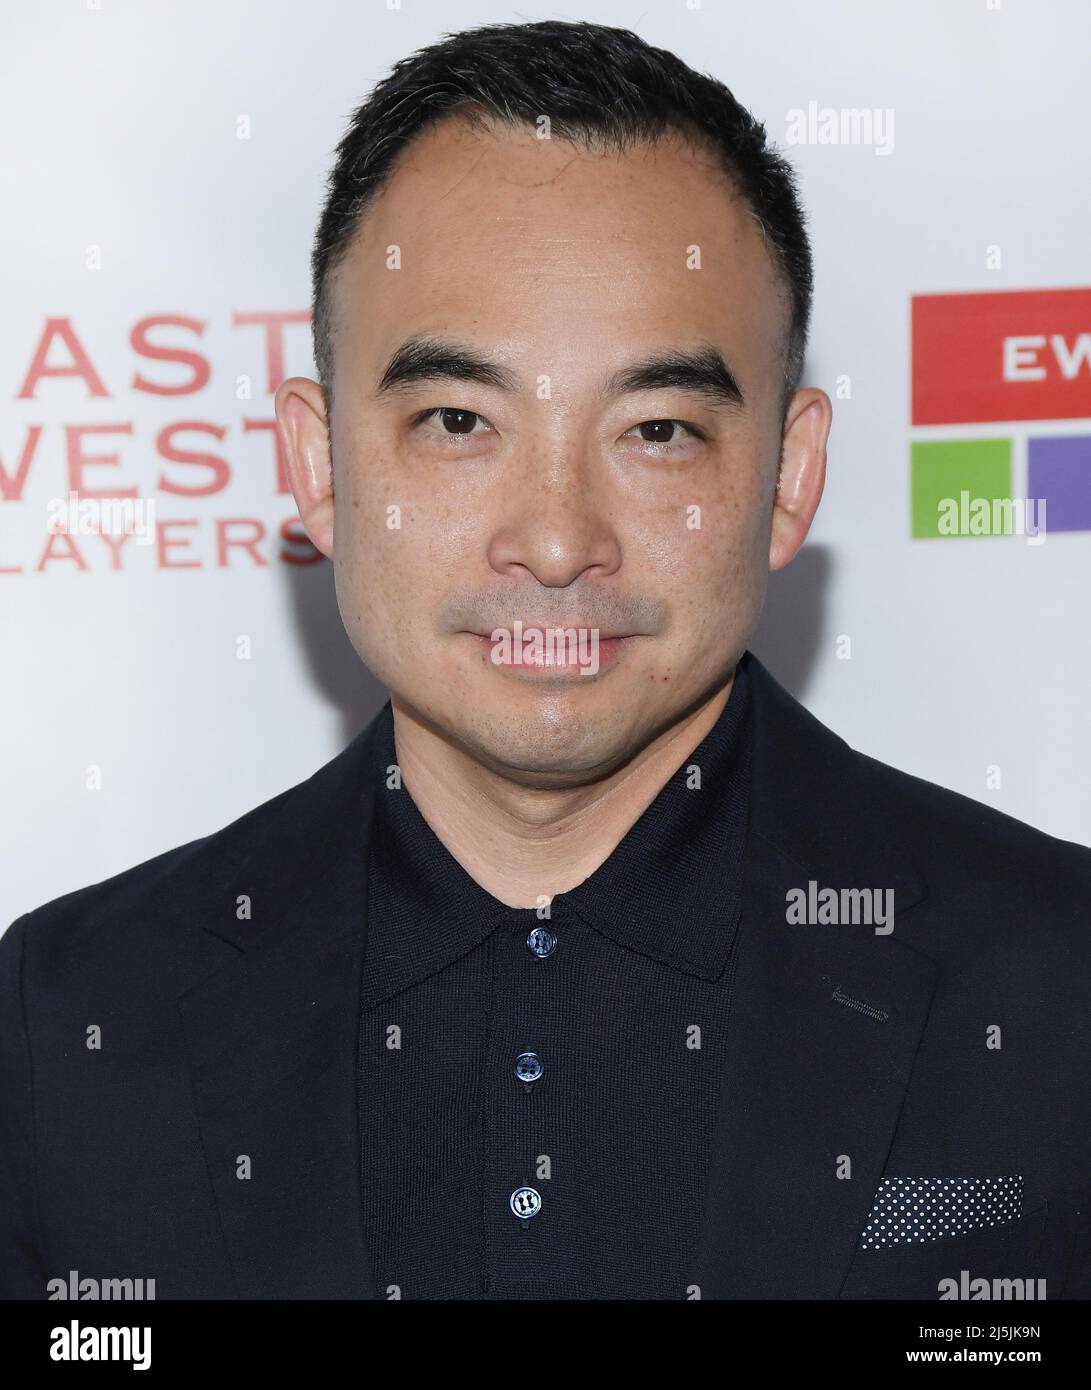 Melvin Mar at the East West Players 56th Anniversary Visionary Awards ...